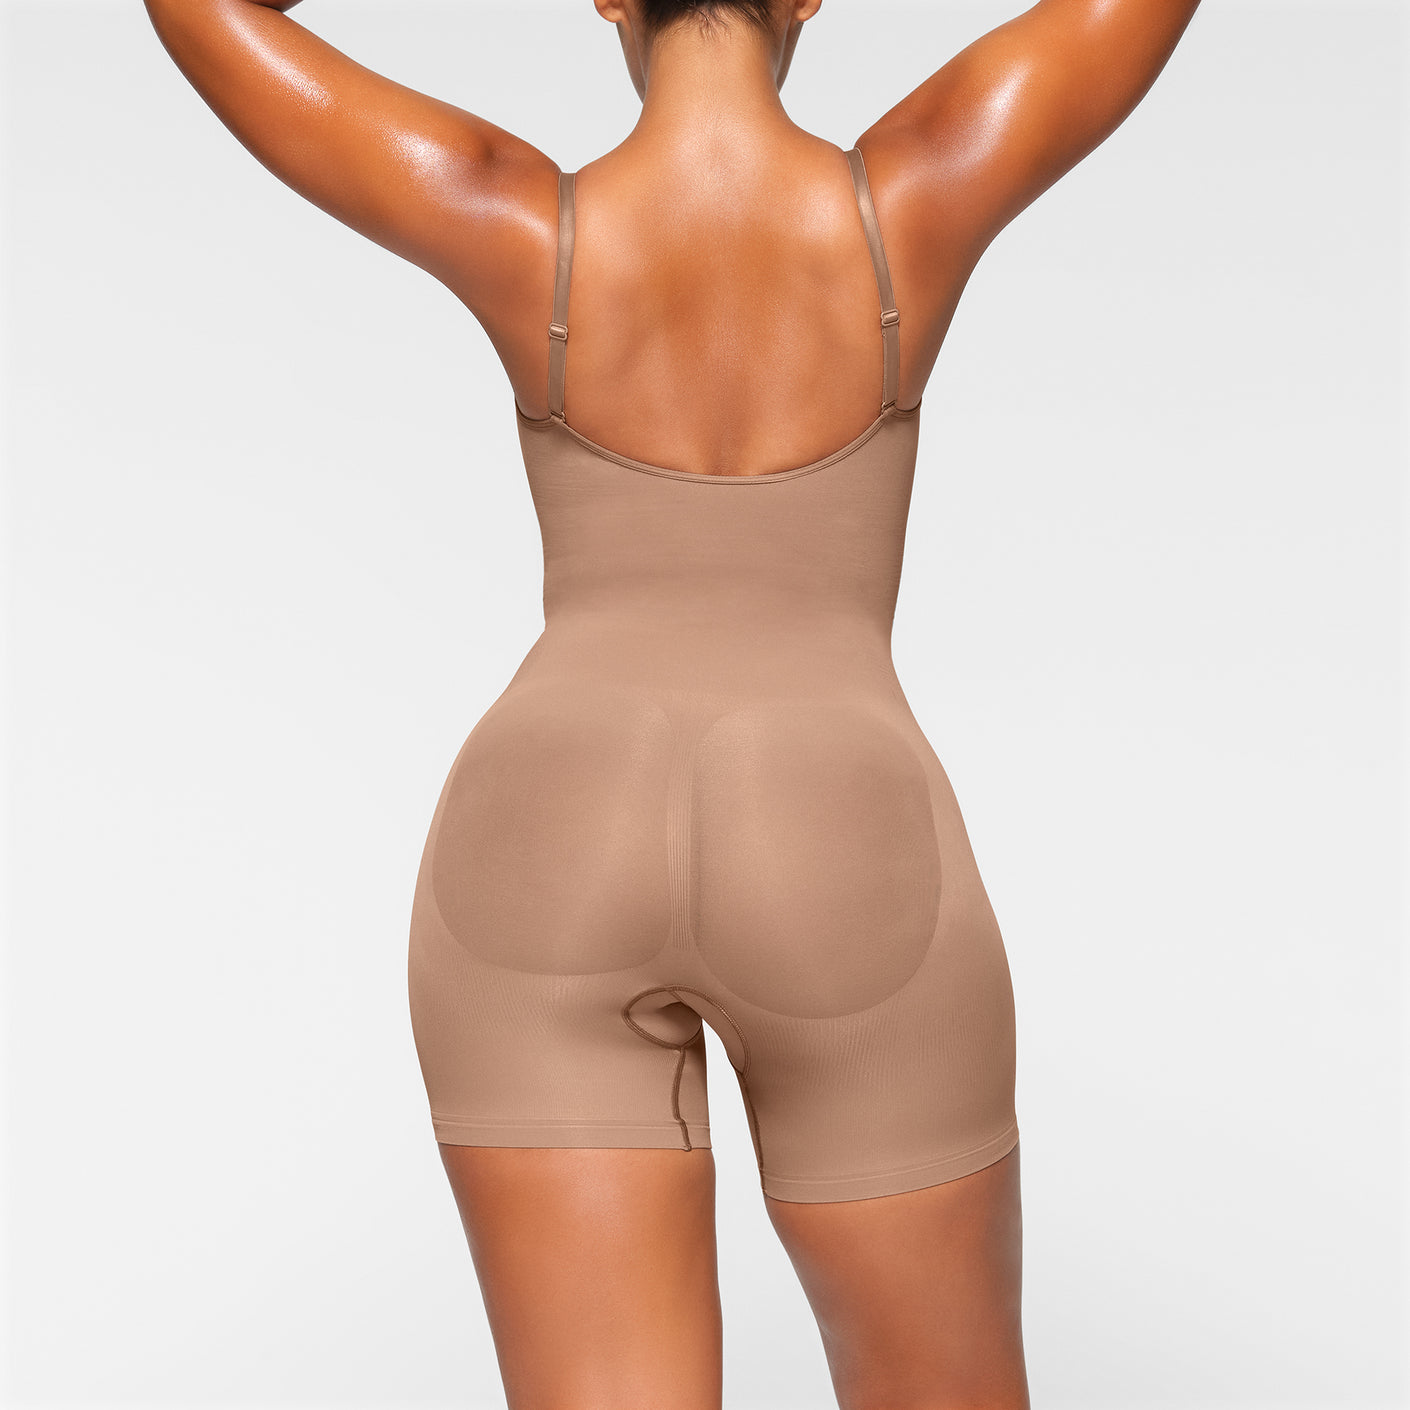 SKIMS Sculpting bodysuit mid thigh with open gusset xxs/xs (for uk6/8 +  butt lifting), Women's Fashion, New Undergarments & Loungewear on Carousell